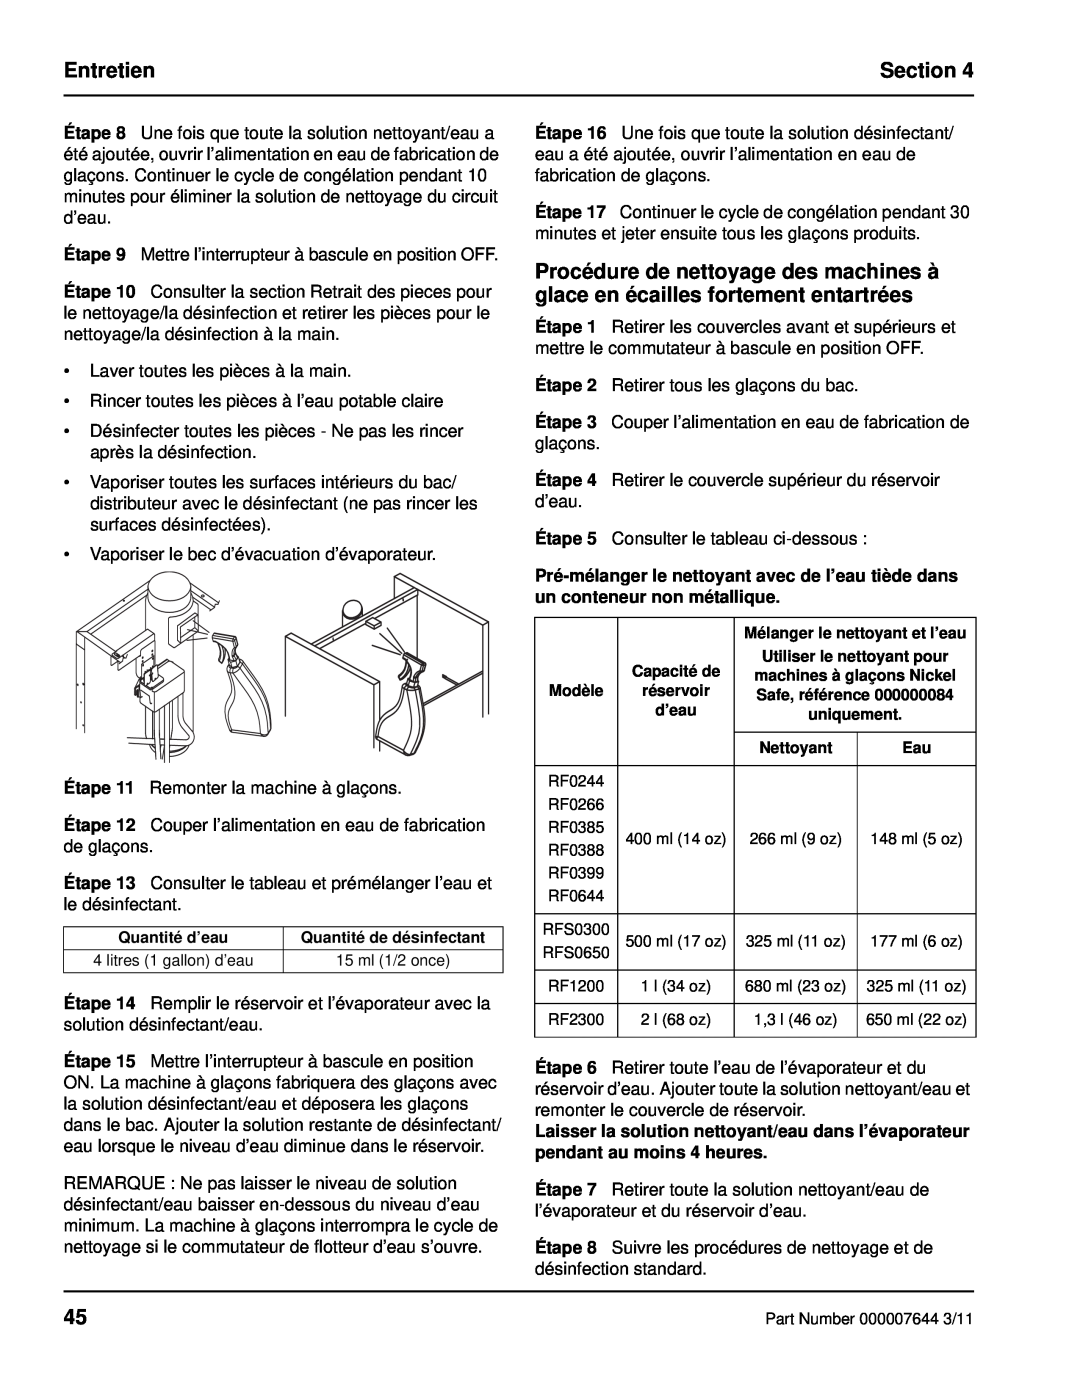 Manitowoc Ice RF manual Entretien, Section 